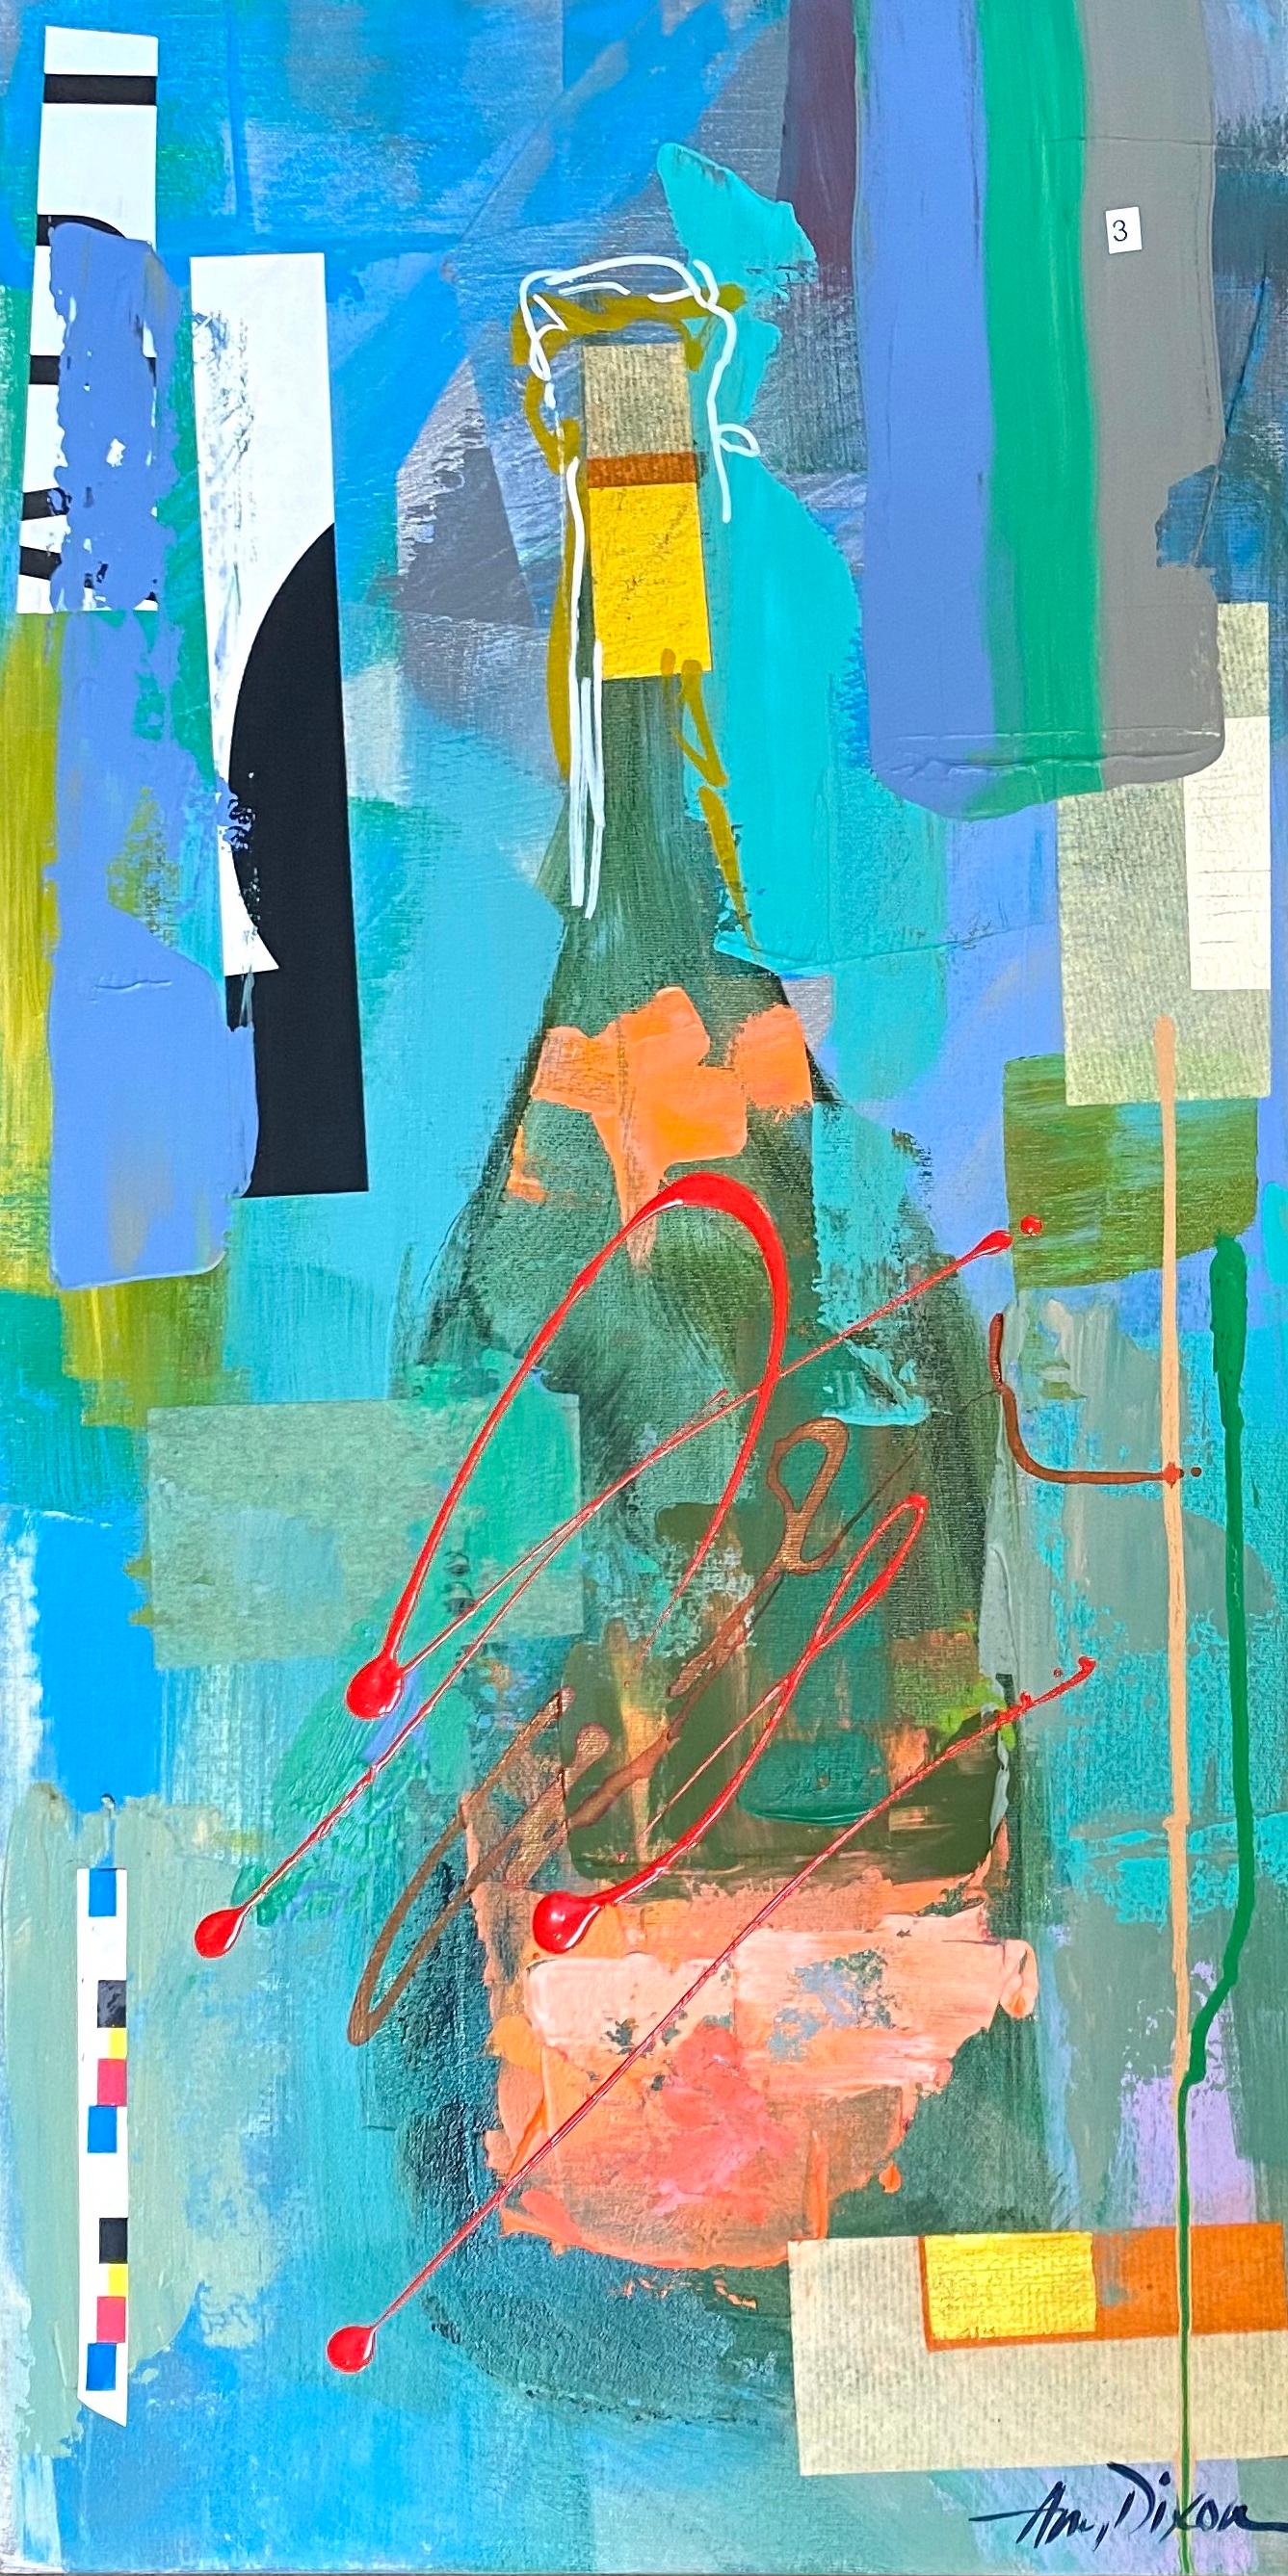 'Veuve Art Collage' is a large abstracted acrylic on canvas painting of square format, created by American artist Amy Dixon in 2021. Featuring a vibrant palette made of a variety of colors such as purple, green, turquoise, red, pink and orange among